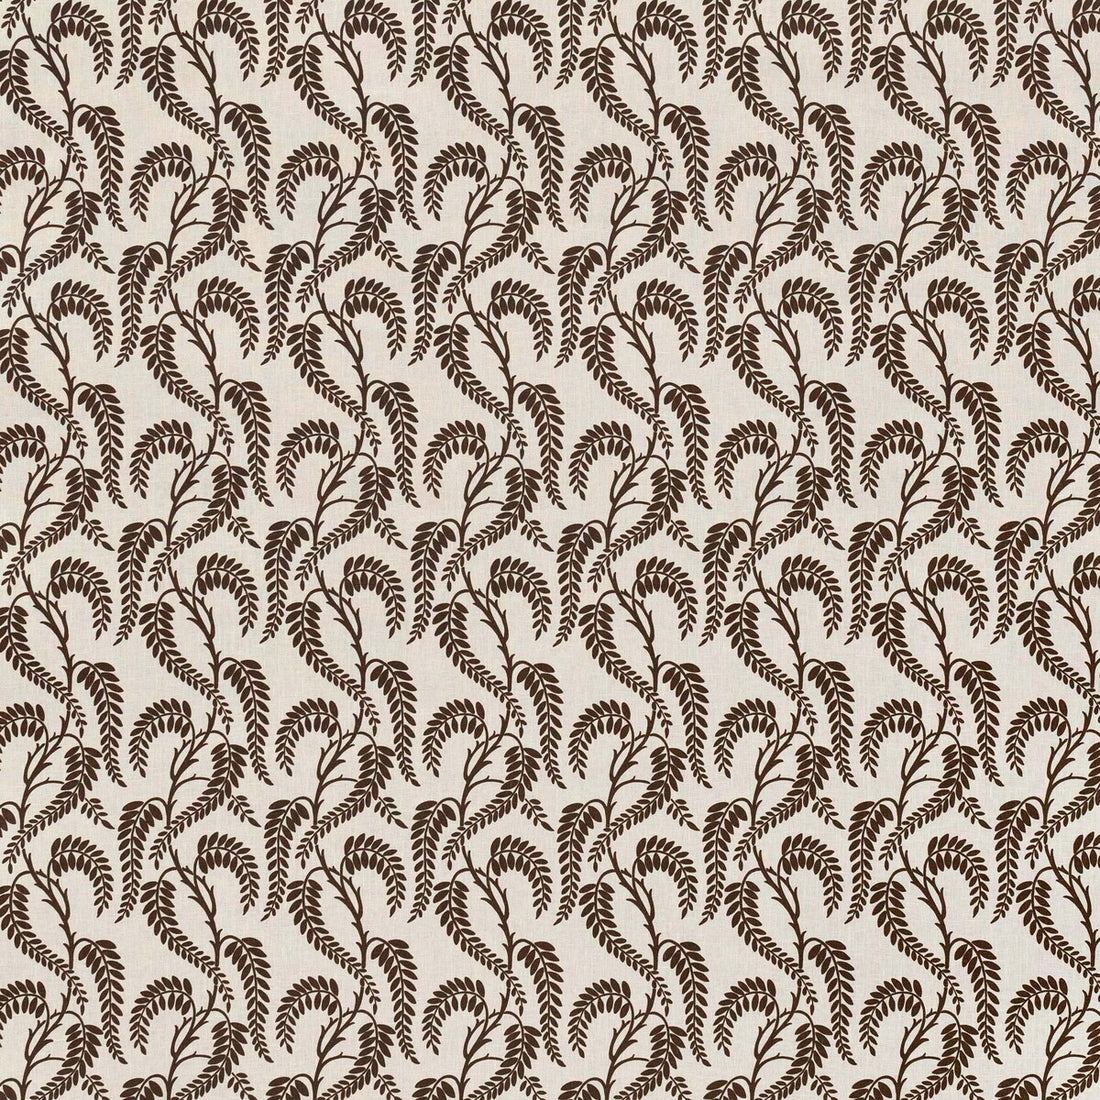 Wisteria fabric in brown white ln color - pattern 2023136.61.0 - by Lee Jofa in the Paolo Moschino Garden II collection